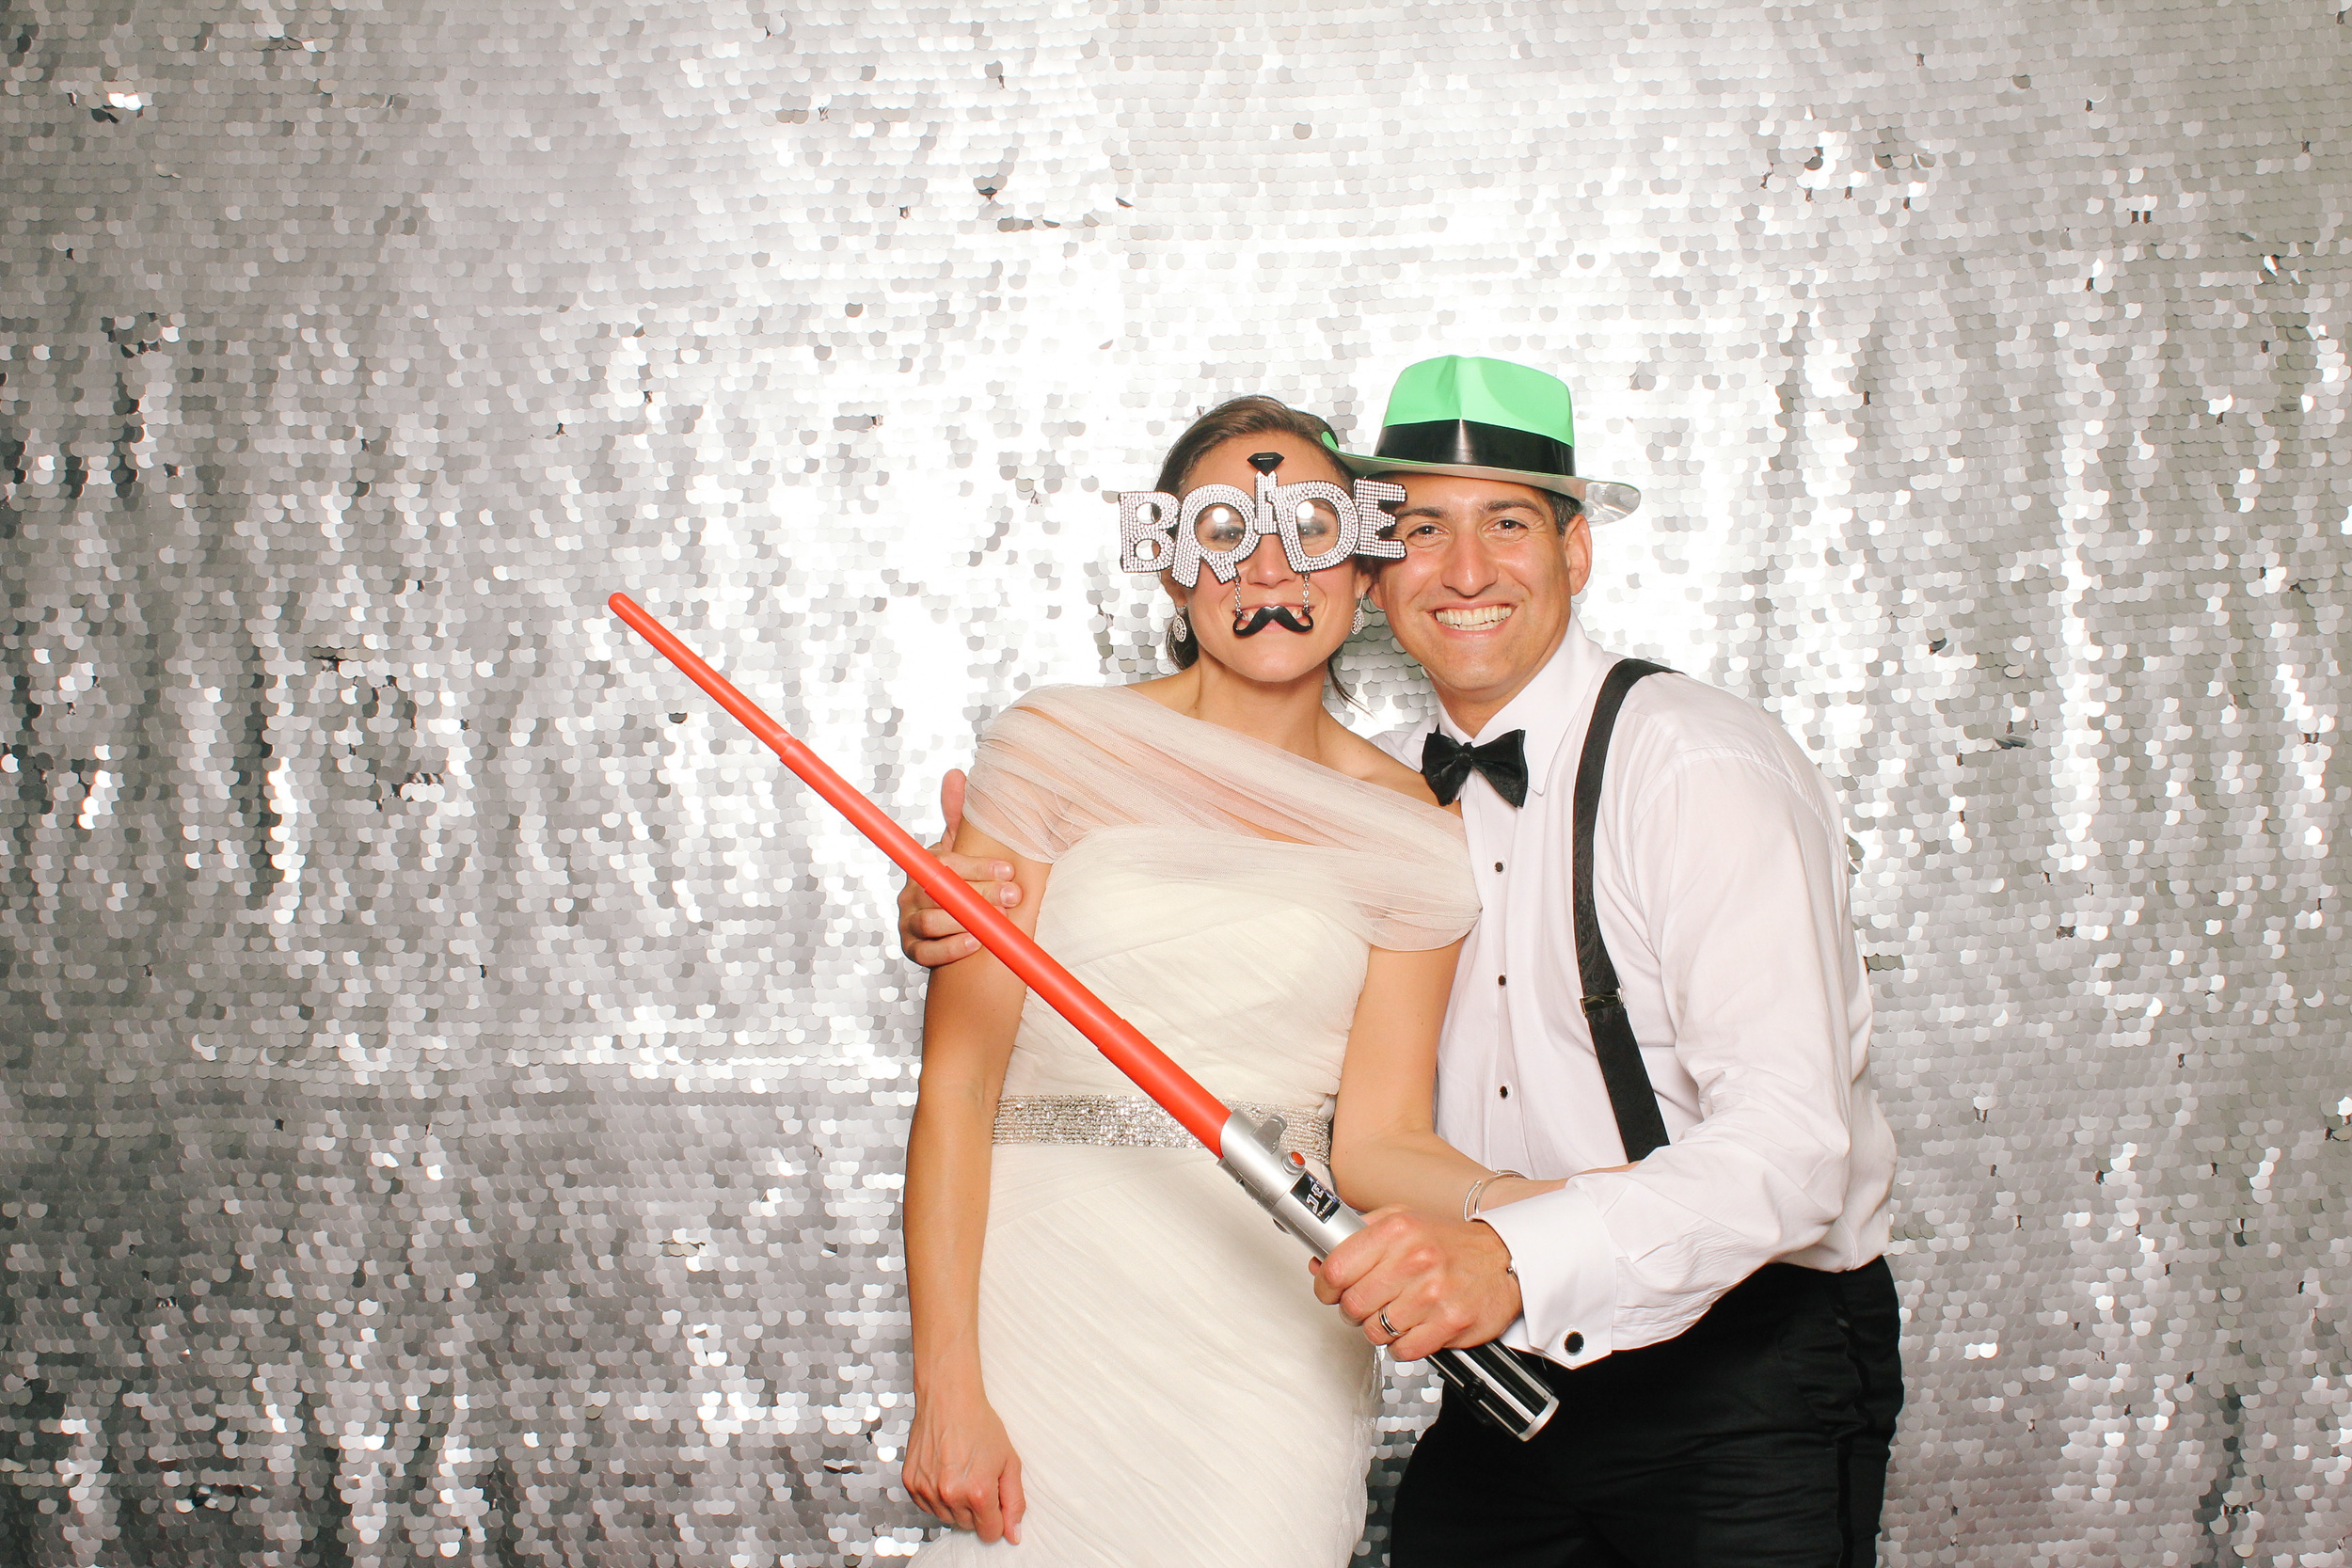 00001-Too Much Awesomeness Photo Booth in Cleveland-20150606.jpg